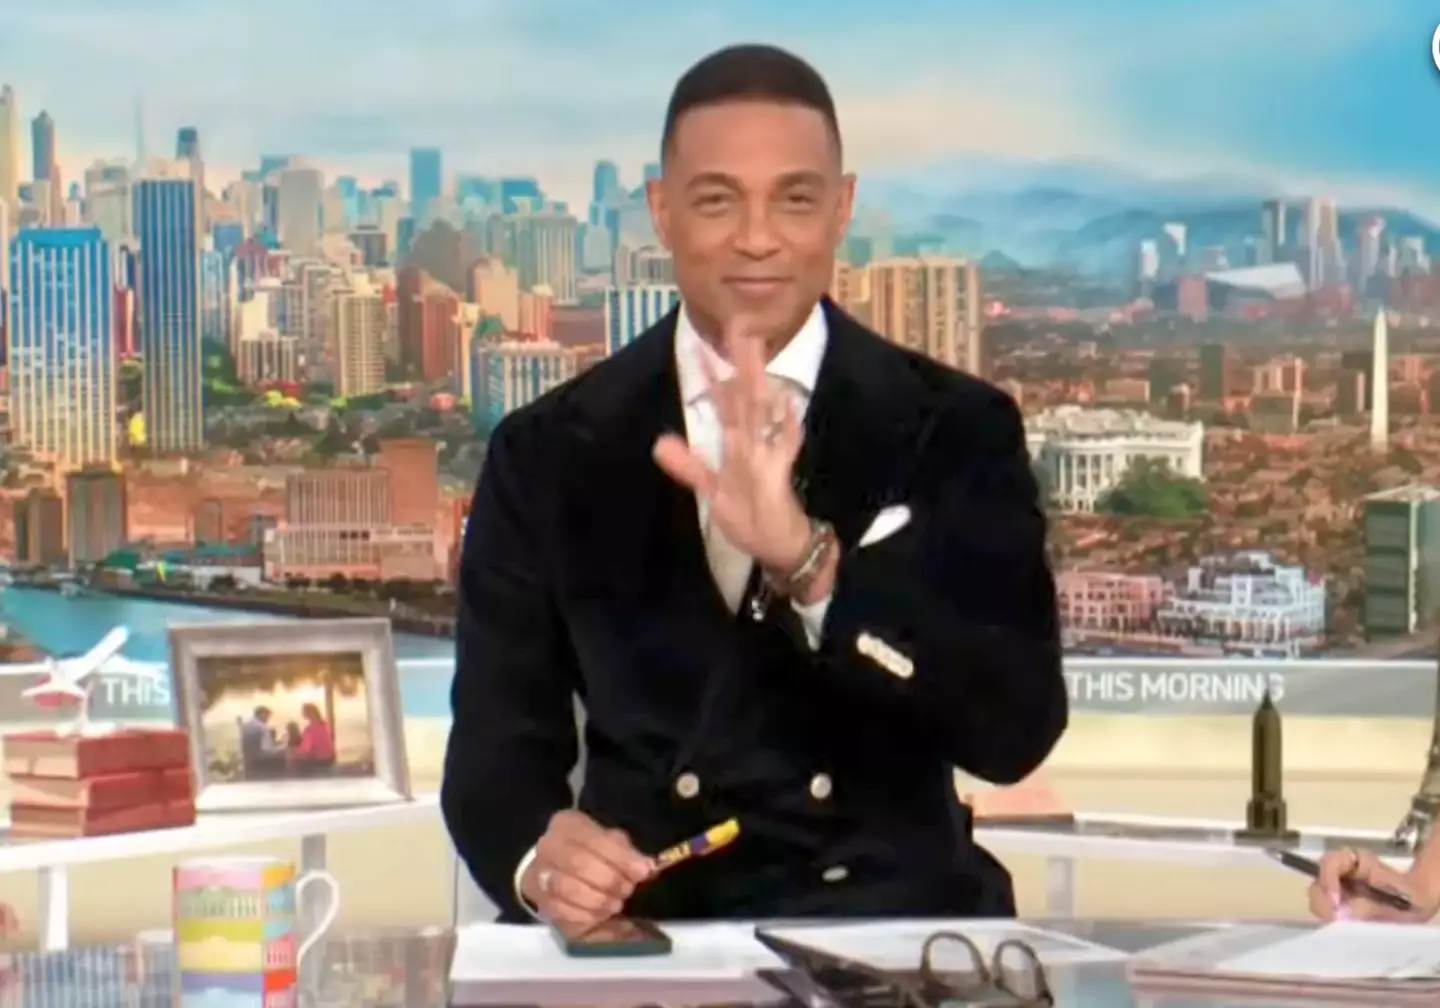 Don Lemon was sacked by CNN earlier this week.